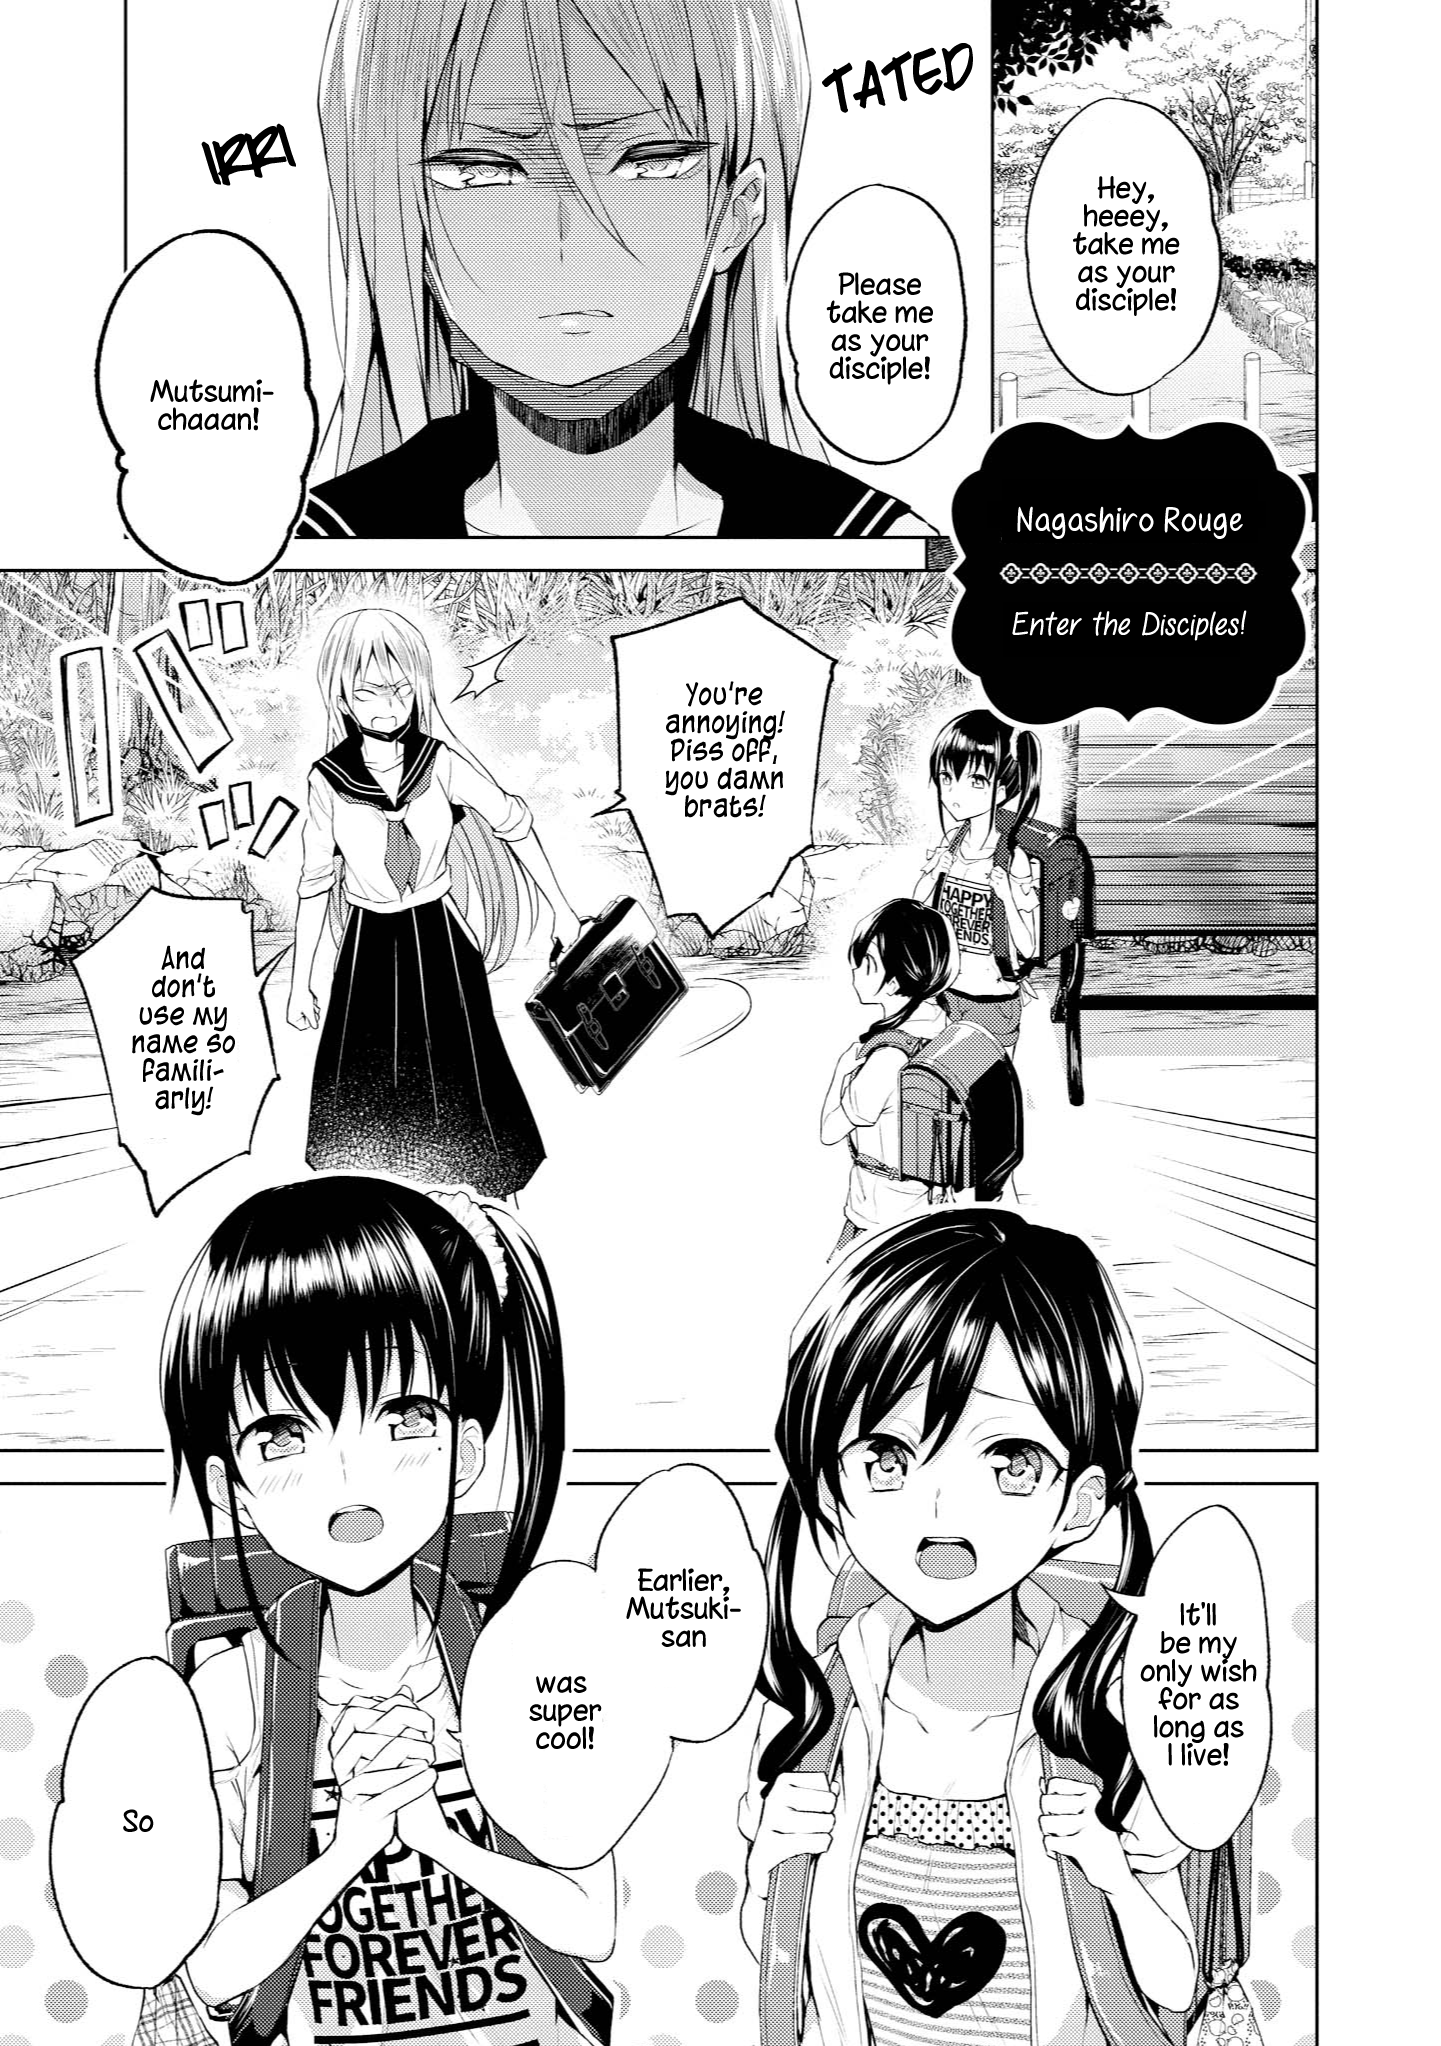 Parfait: Onee-Loli Yuri Anthology Vol.2 Chapter 24: Enter The Disciples! - Picture 1